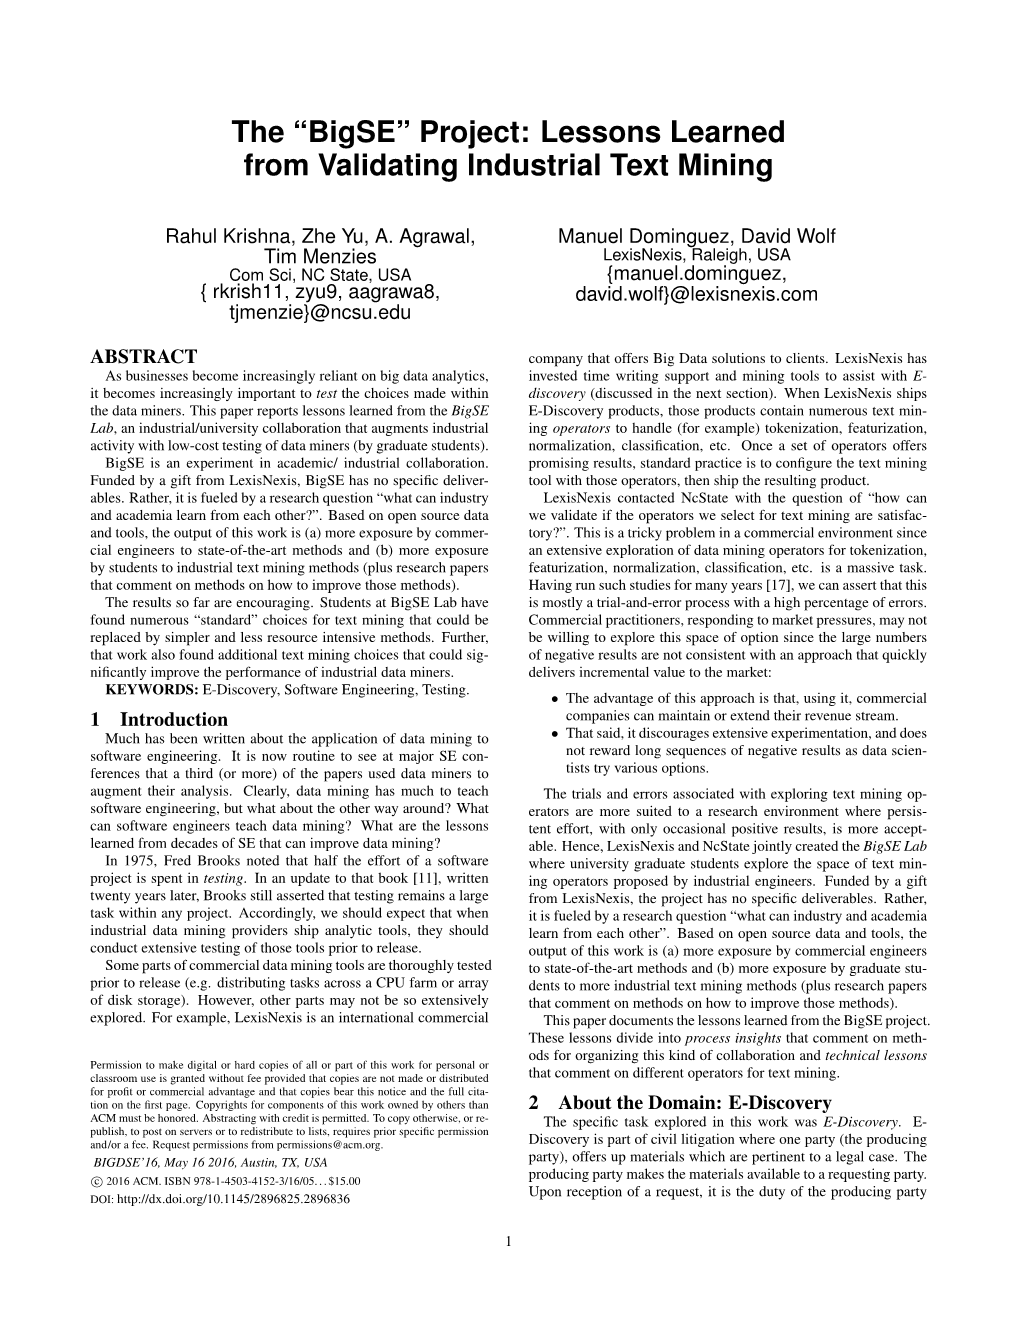 The “Bigse” Project: Lessons Learned from Validating Industrial Text Mining